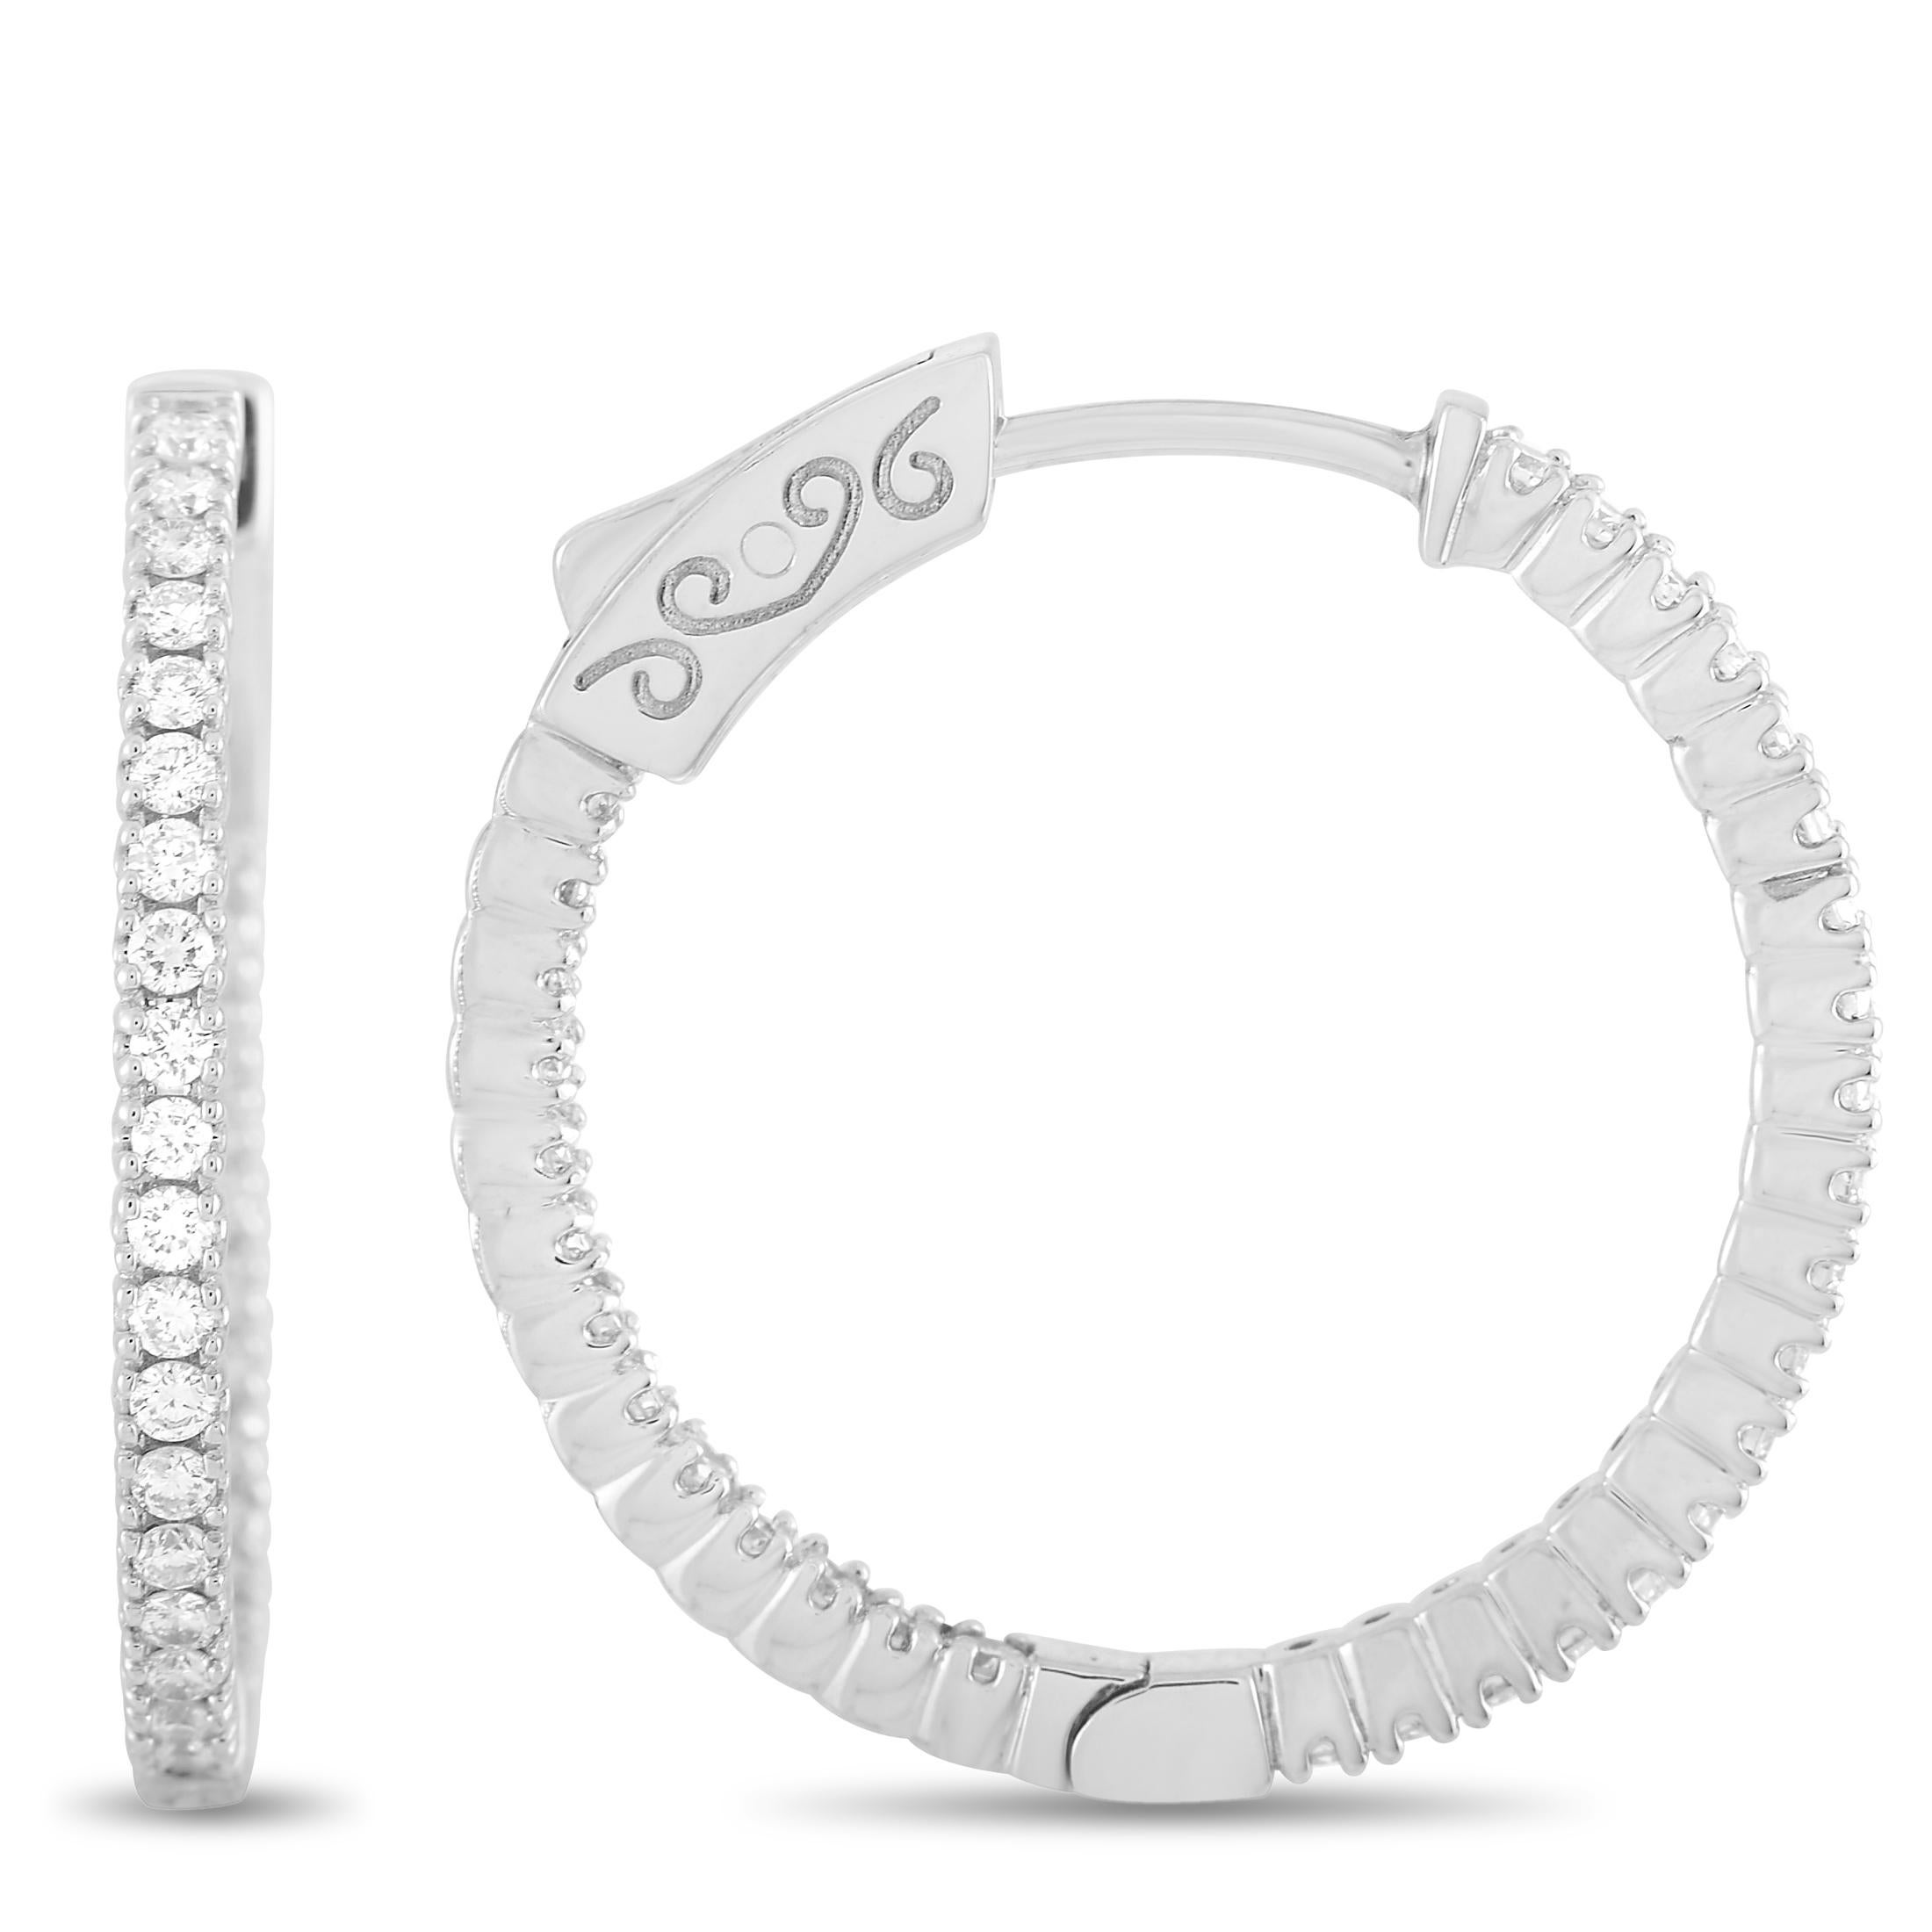 These LB Exclusive hoop earrings are made of 14K white gold and embellished with diamonds that amount to 0.75 carats. The earrings measure 0.80” in length and 0.15” in width, and each of the two weighs 2.3 grams.
 
 The pair is offered in brand new